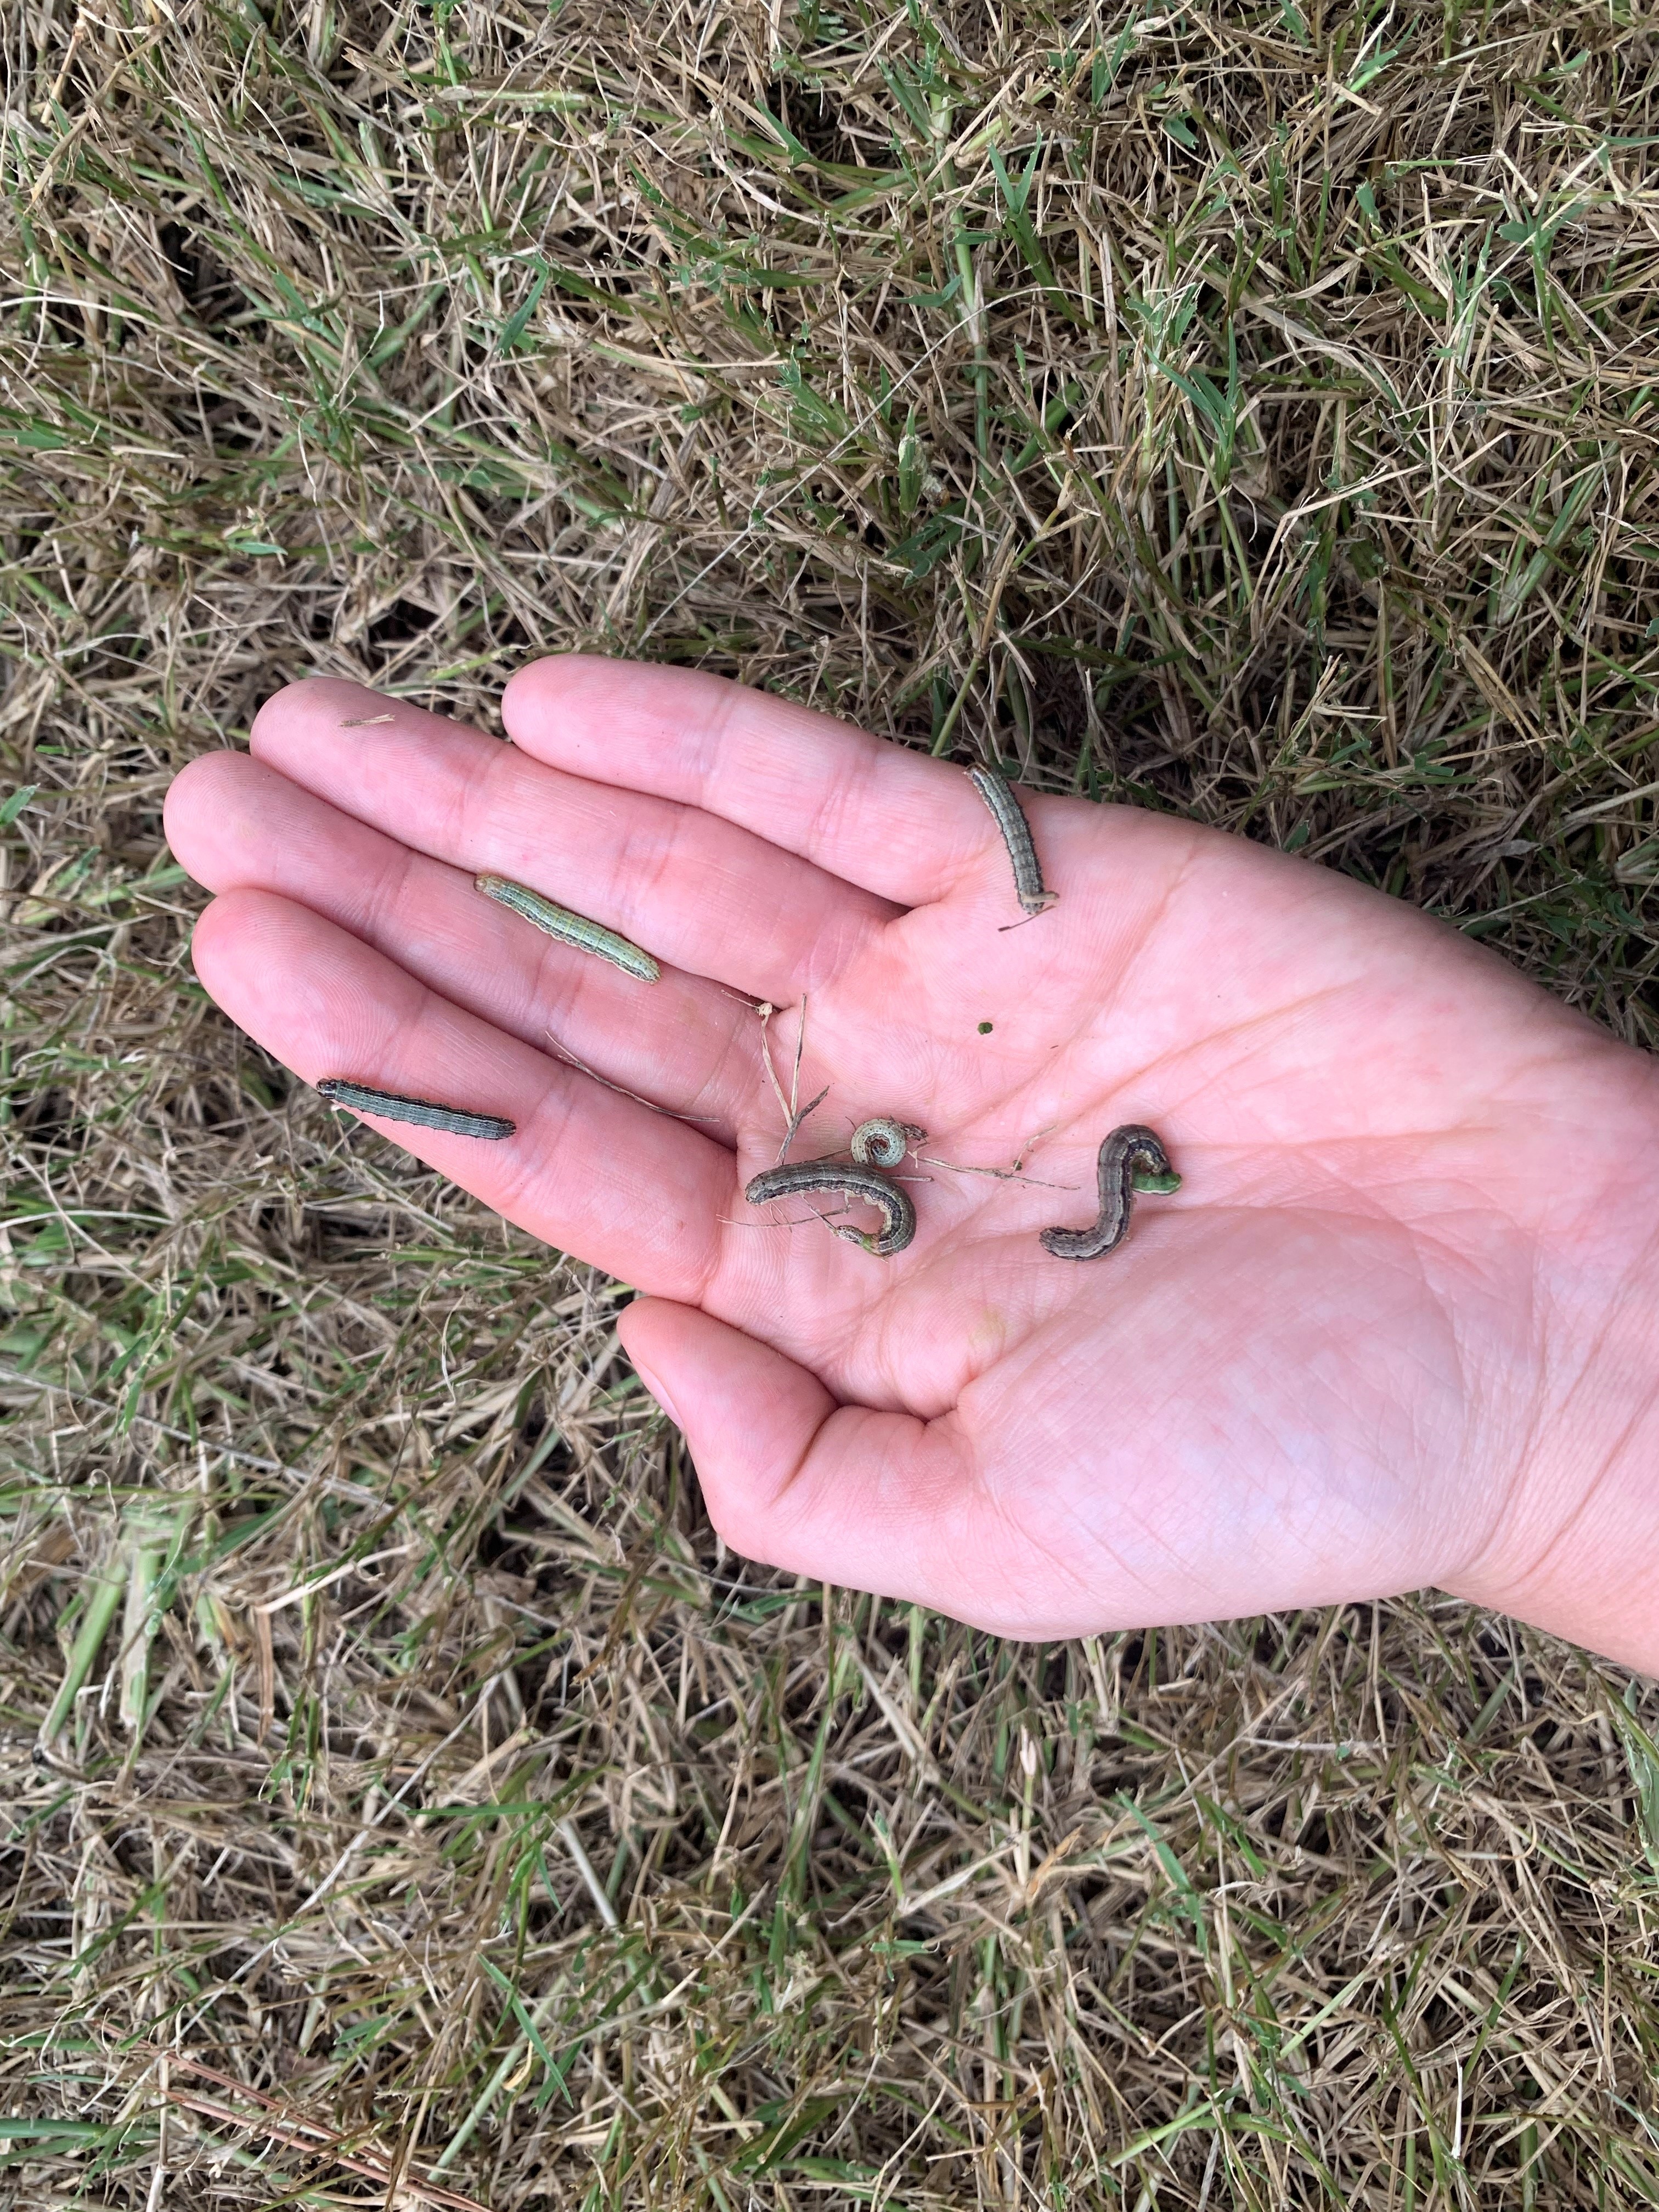 Your Lawn Is Gone? OSU's Rom Royer Helps Explain Oklahoma's Armyworm Infestation